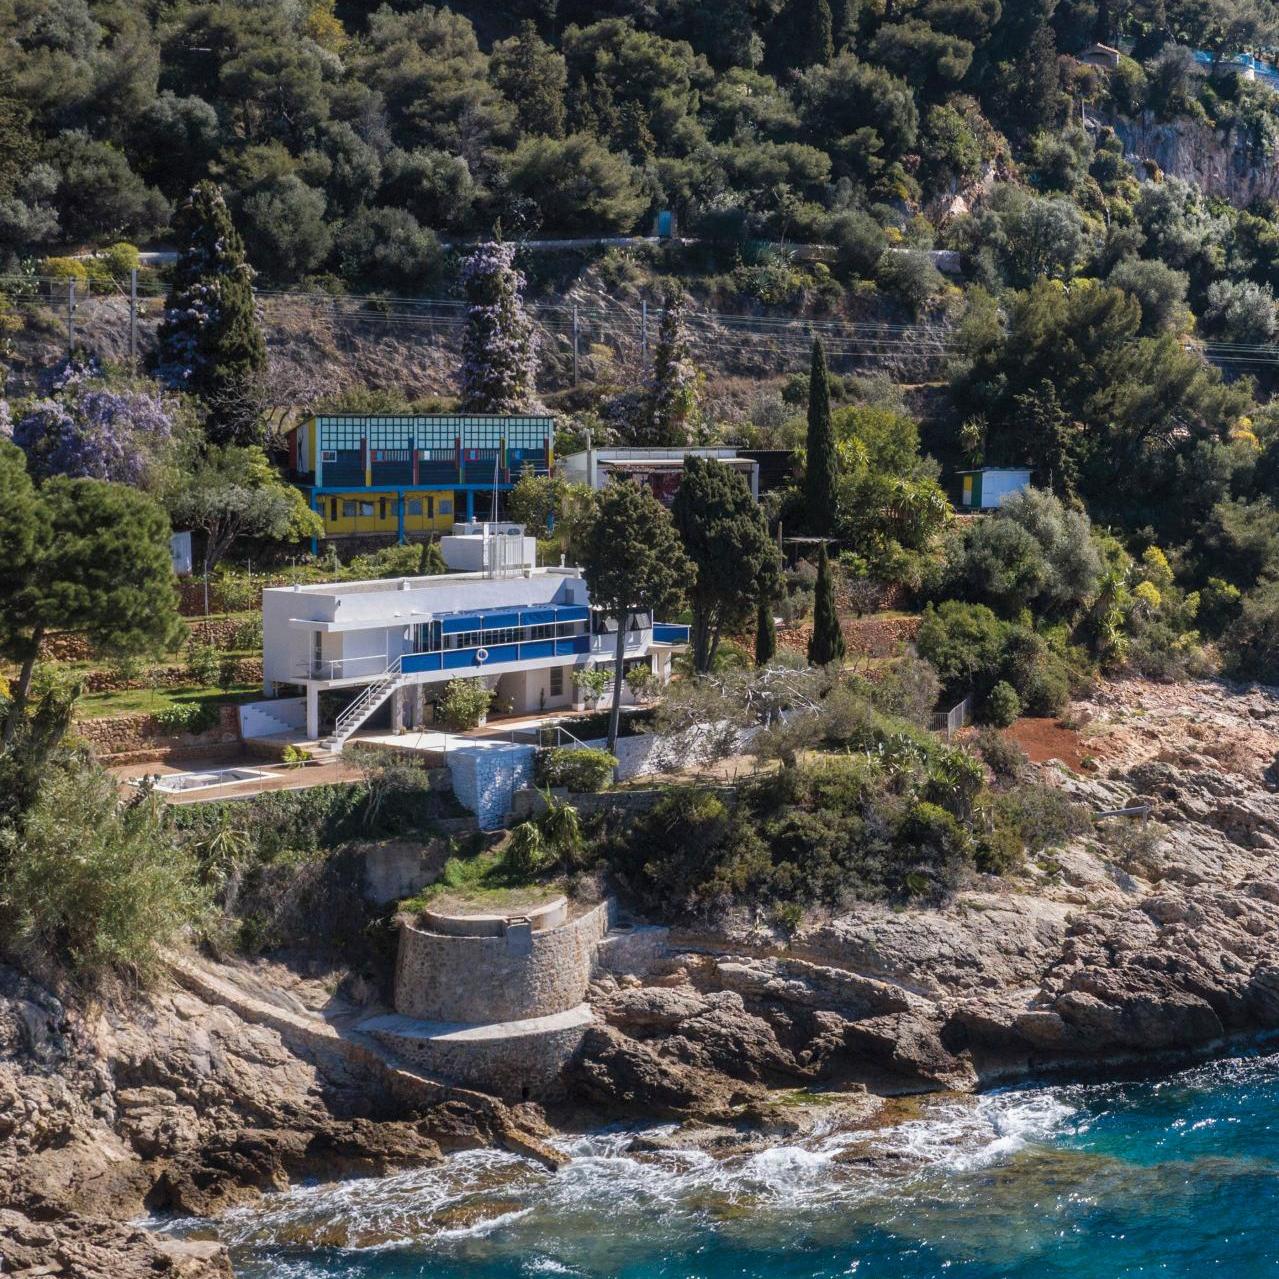 Villa E 1027: Eileen Gray's Masterpiece Rises from the Ashes